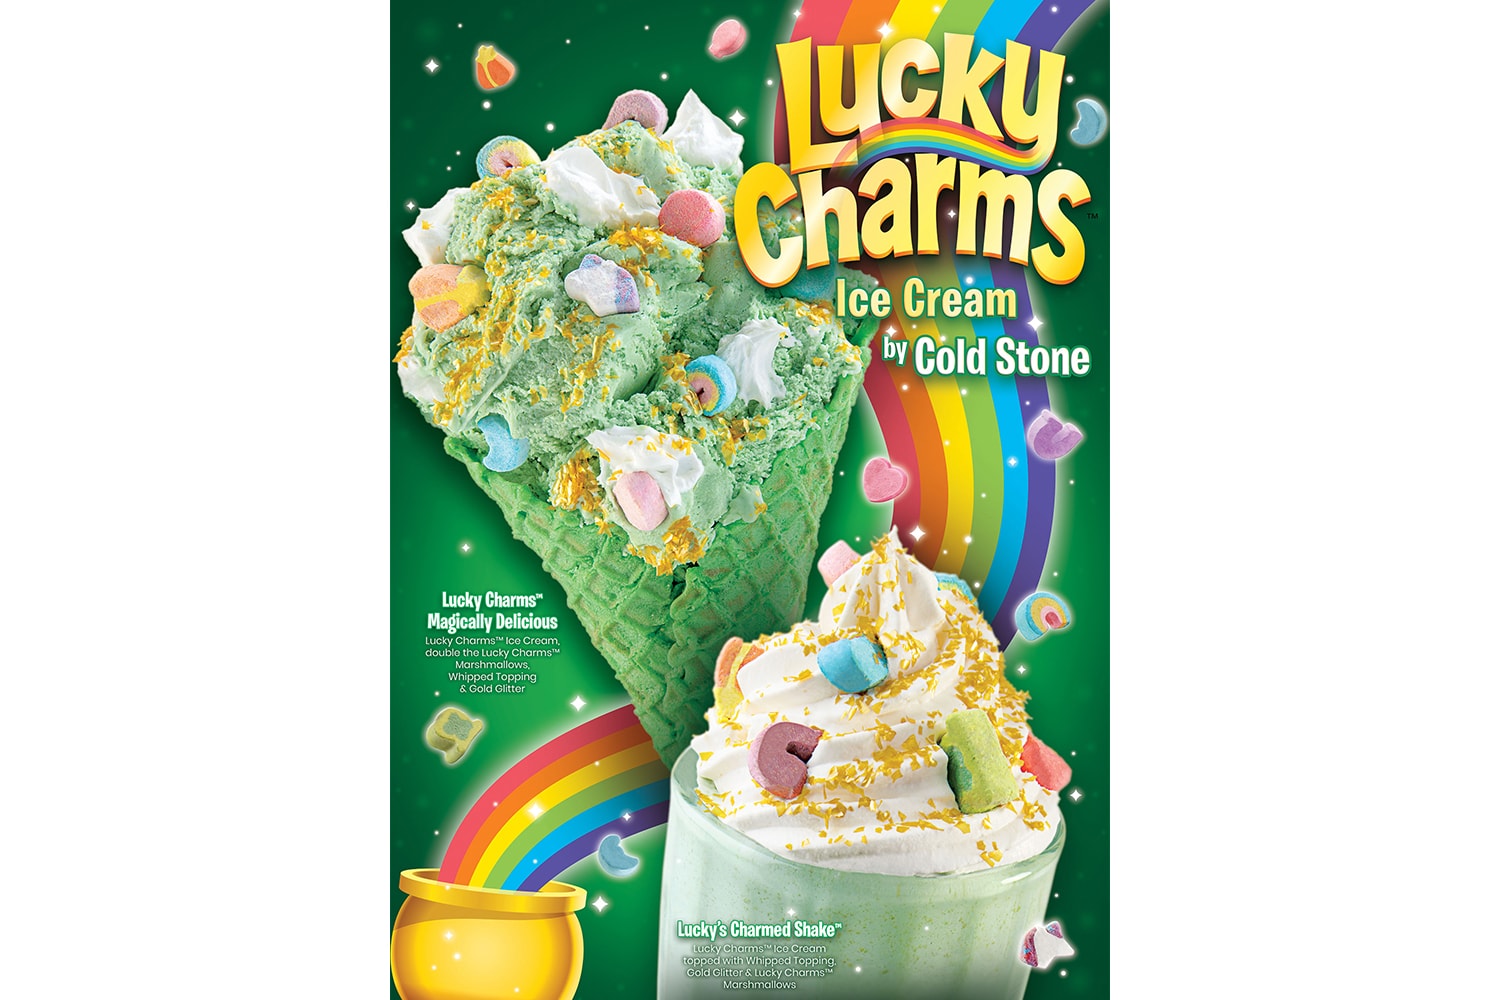 Turn Milk Green Lucky Charms St. Patrick’s Day Release Crocs Candy Land Cold Stone Creamery Info Hasbro CharmWorld Candy Land Info